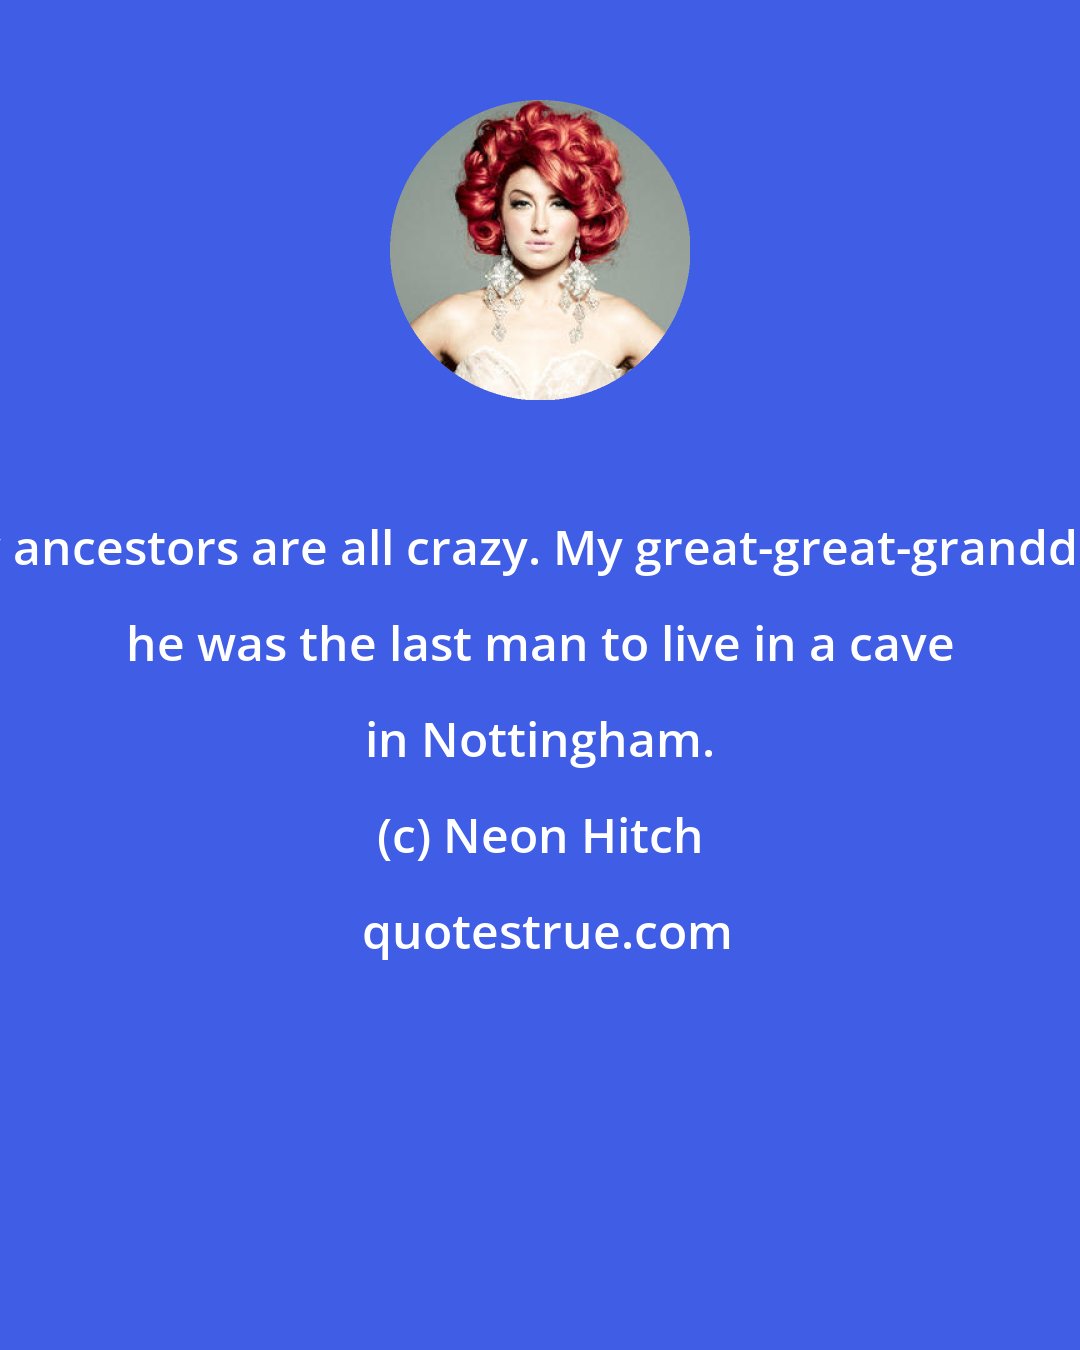 Neon Hitch: My ancestors are all crazy. My great-great-granddad, he was the last man to live in a cave in Nottingham.